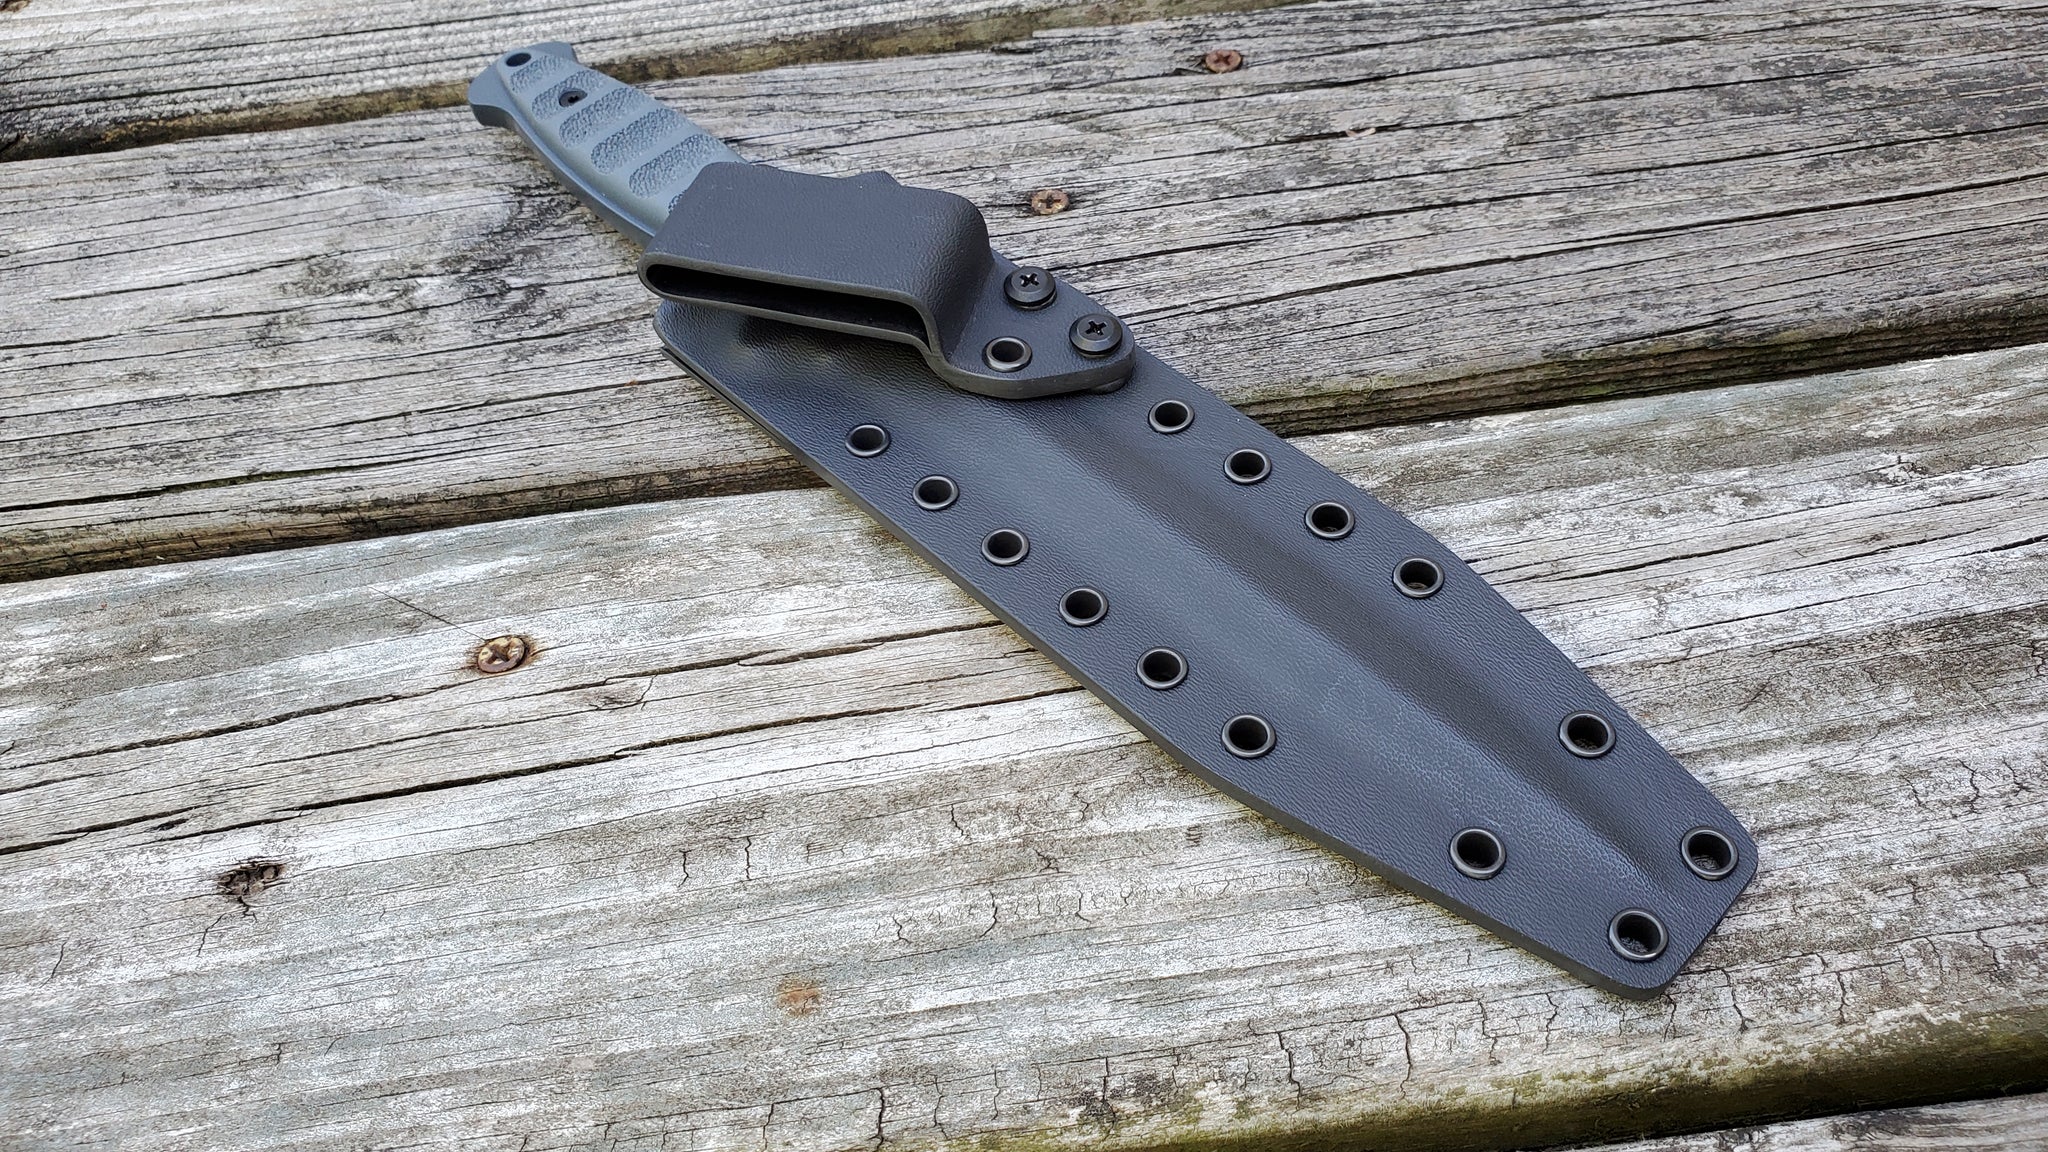 COLD STEEL "WASP" custom kydex sheath with Belt attachment